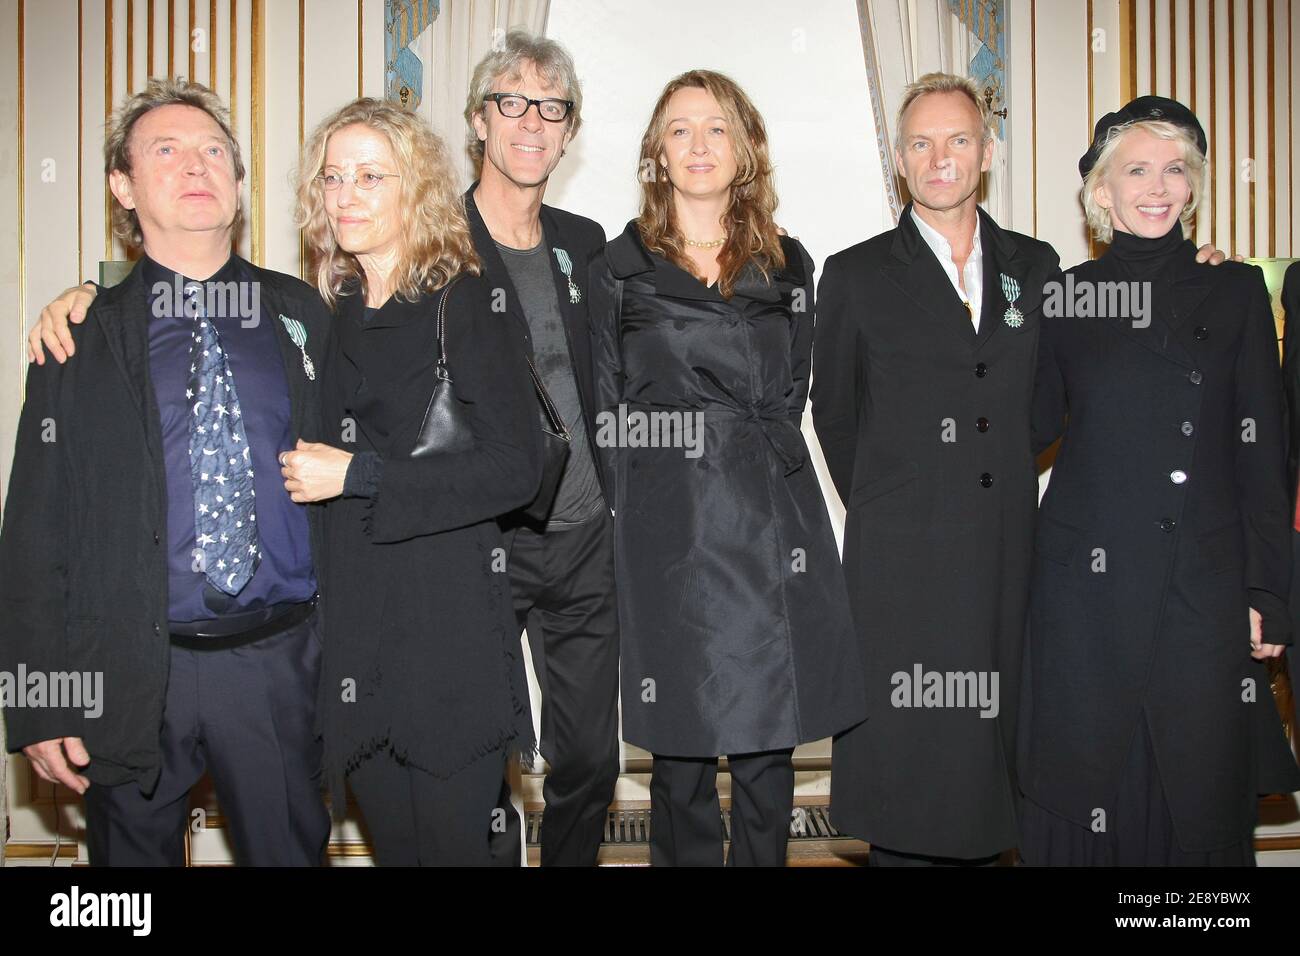 L-R) Andy Summers his wife Kate Summers, Stewart Copeland and his wife Copeland, and Trudie Styler pose together after The Police were inducted 'Knights in the Order of